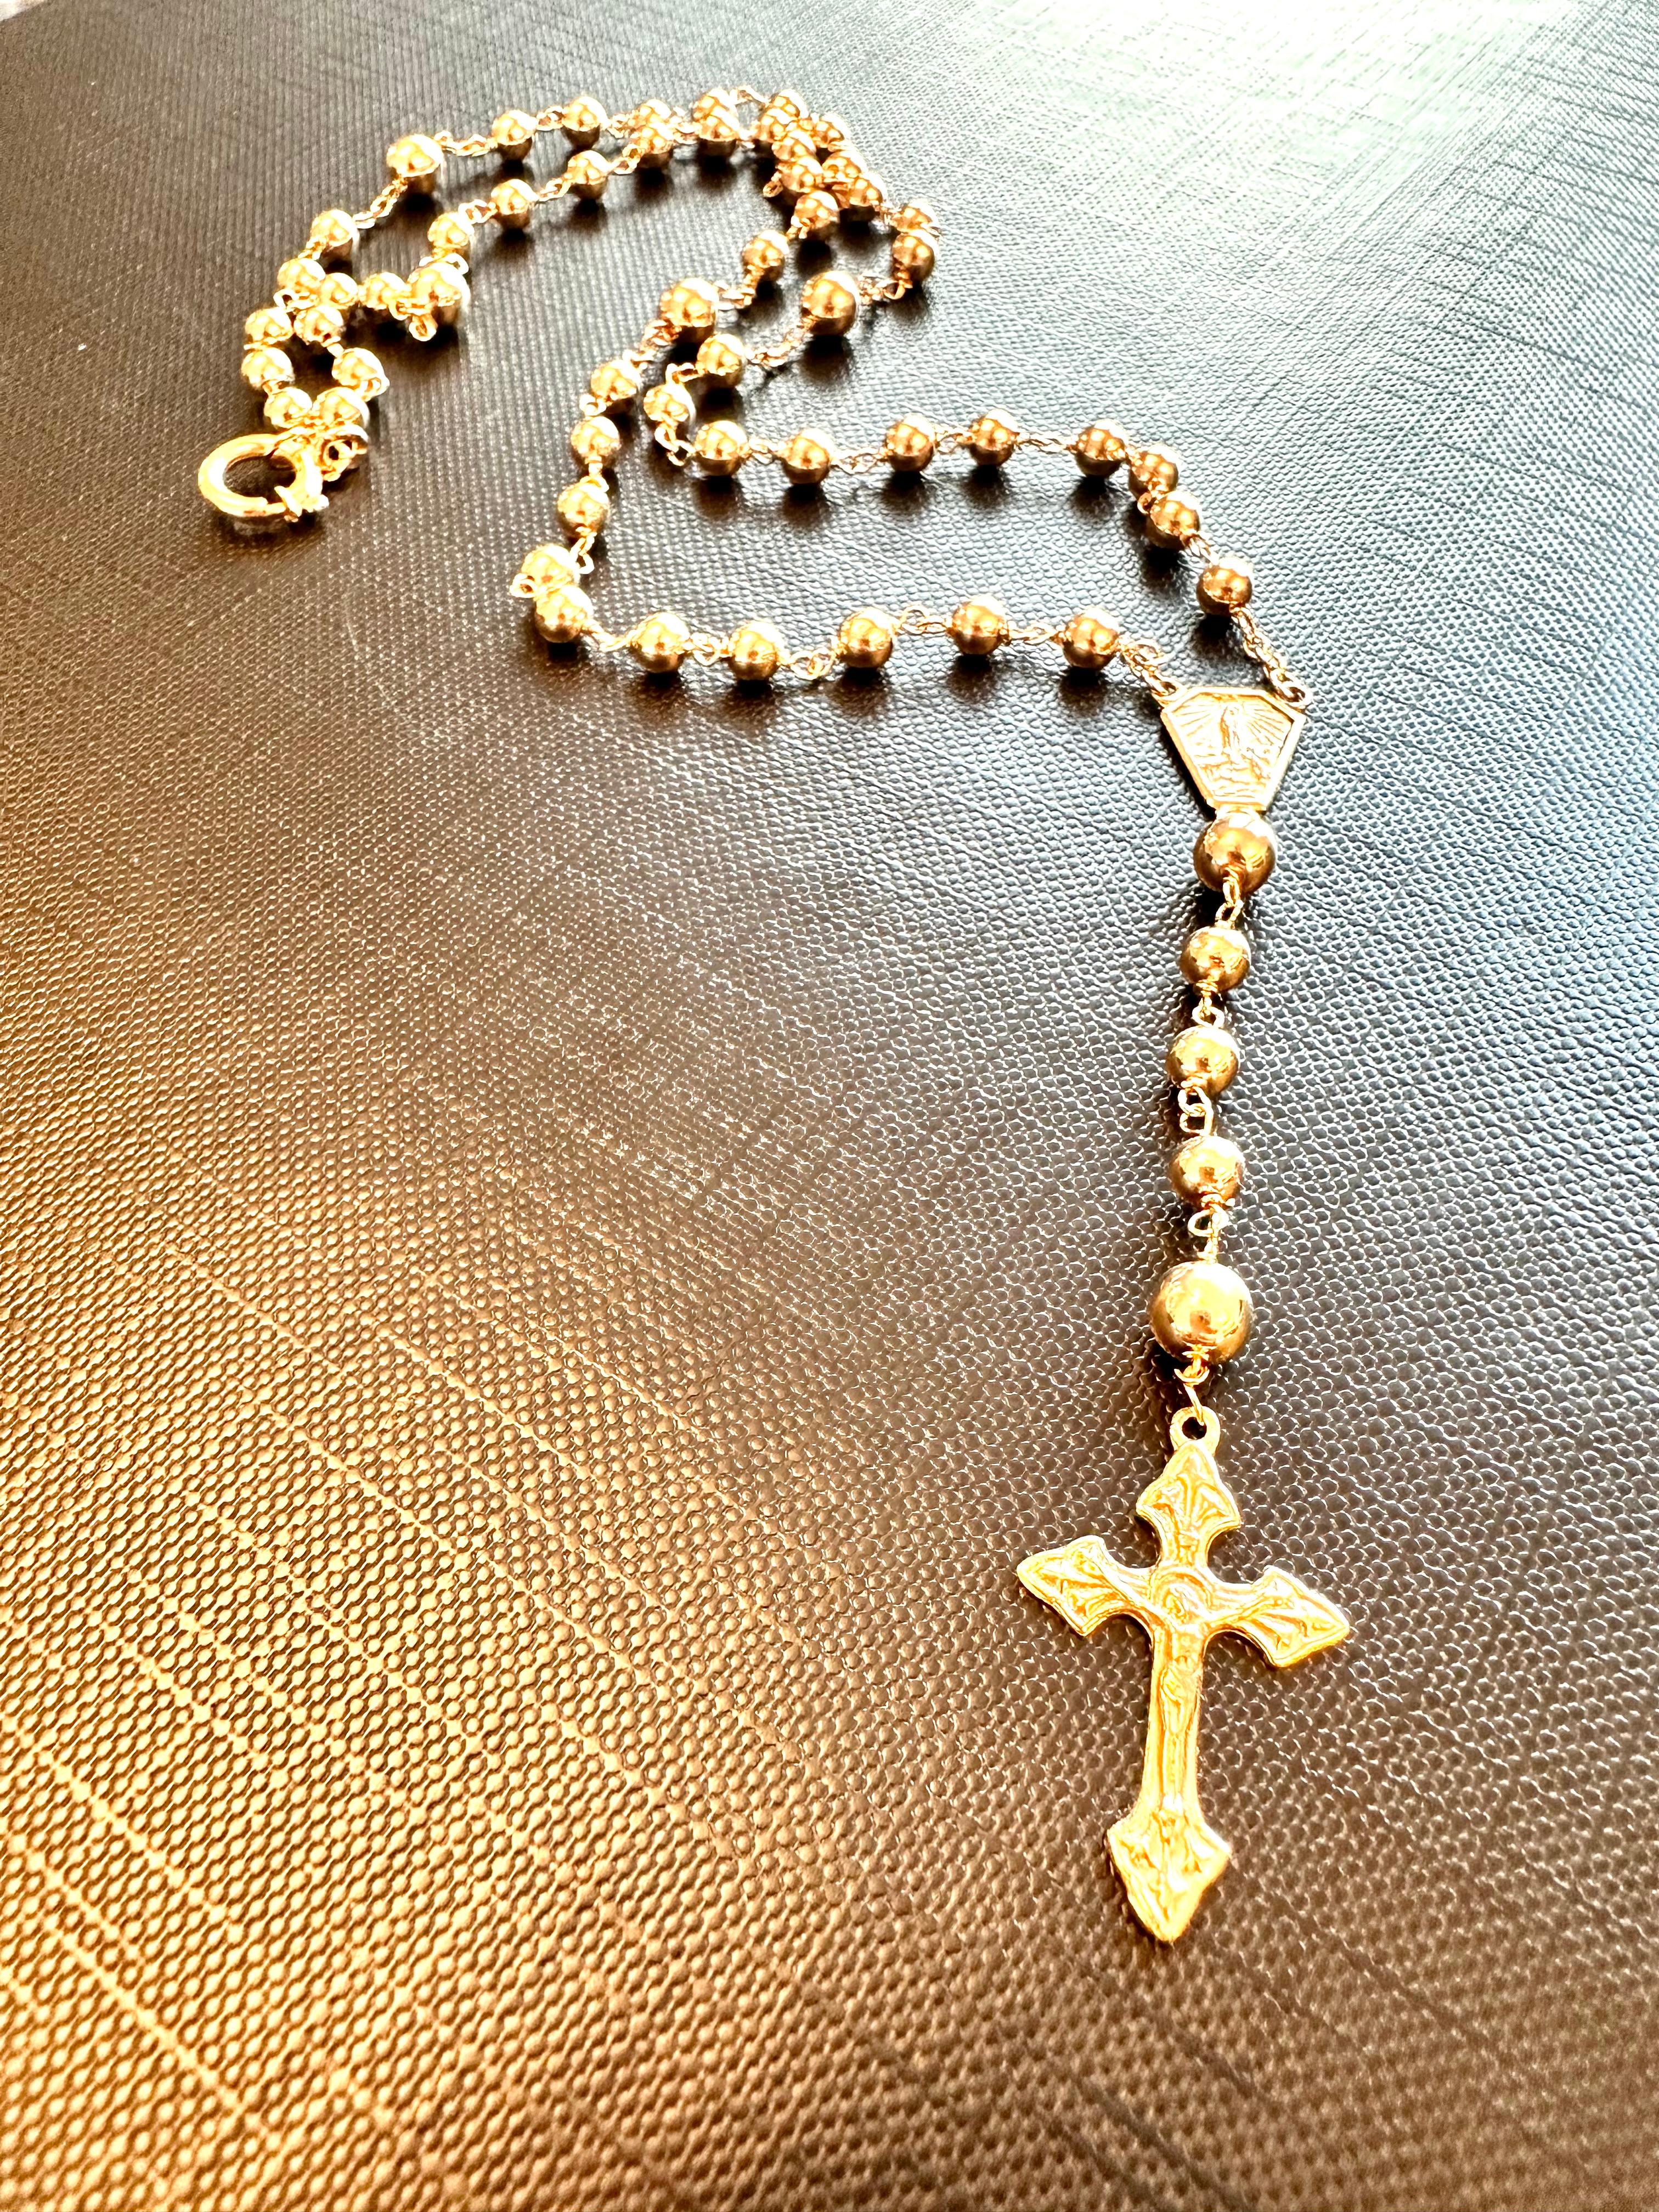 Fashion and spirituality to wear. This portuguese rosary is a very special item and it is very difficult to find it in gold. In addition to being an object of worship and prayer, it has also become a fashionable object among young people as a neck